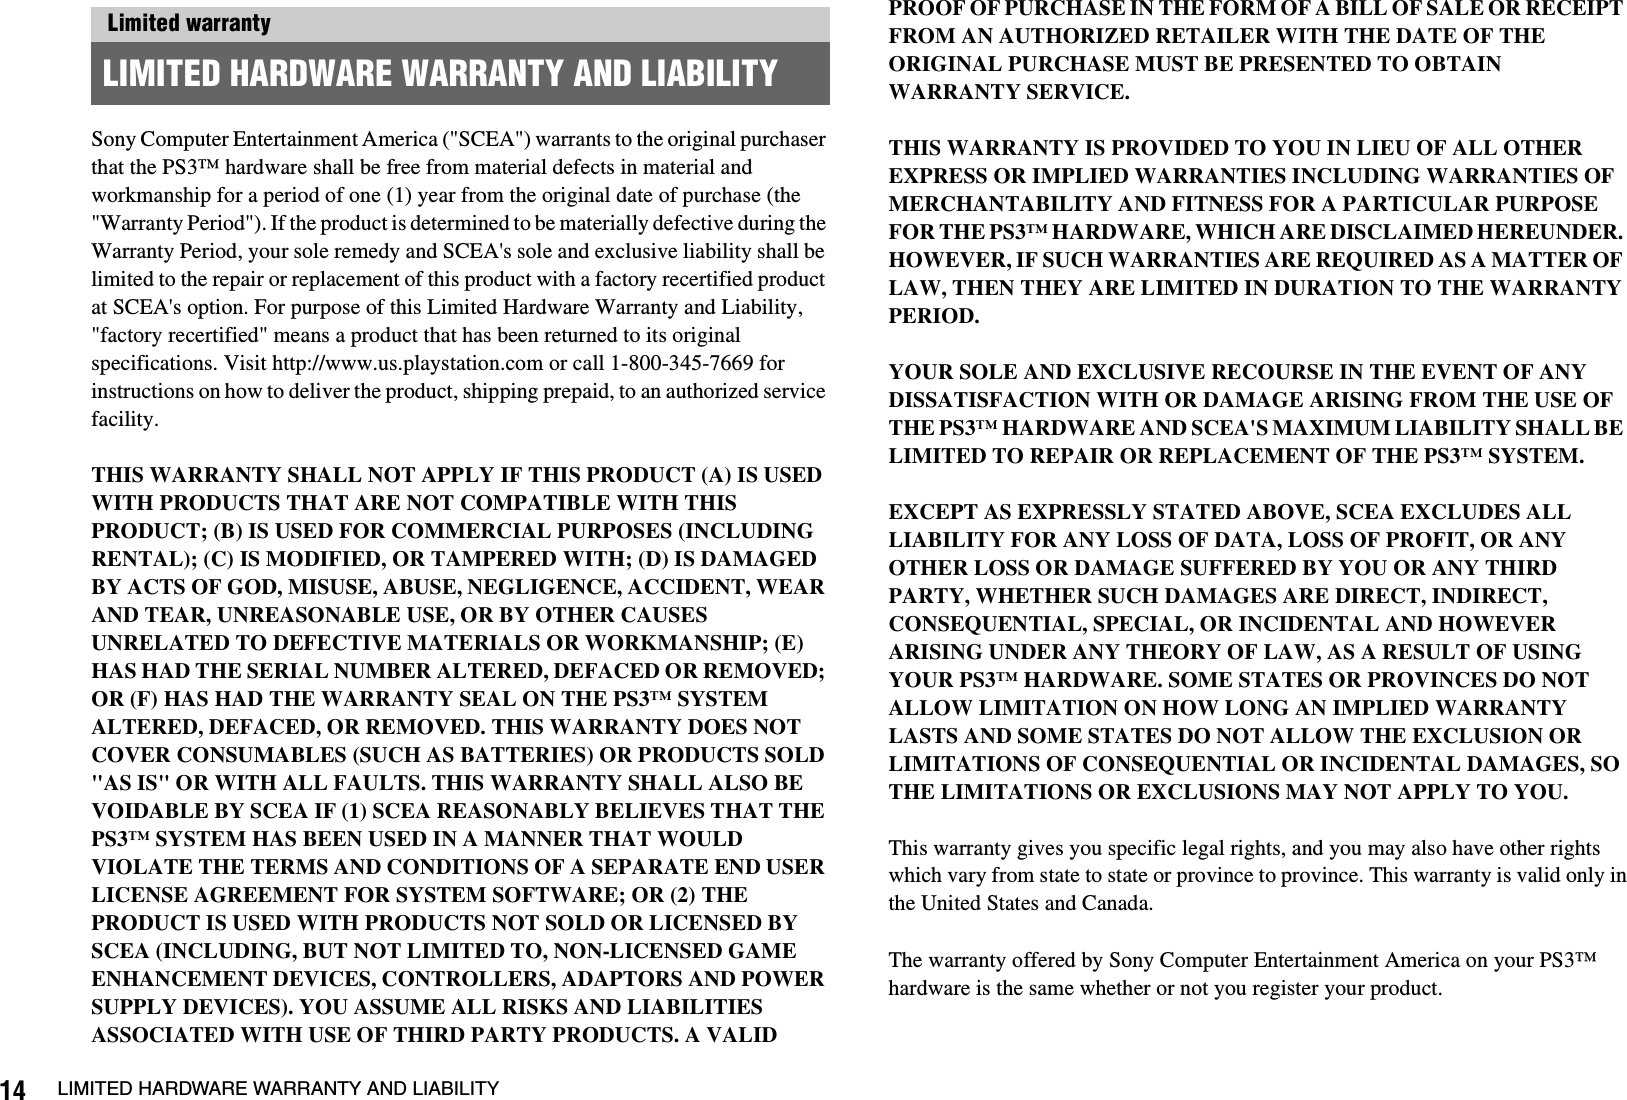 14 LIMITED HARDWARE WARRANTY AND LIABILITYSony Computer Entertainment America (&quot;SCEA&quot;) warrants to the original purchaser that the PS3™ hardware shall be free from material defects in material and workmanship for a period of one (1) year from the original date of purchase (the &quot;Warranty Period&quot;). If the product is determined to be materially defective during the Warranty Period, your sole remedy and SCEA&apos;s sole and exclusive liability shall be limited to the repair or replacement of this product with a factory recertified product at SCEA&apos;s option. For purpose of this Limited Hardware Warranty and Liability, &quot;factory recertified&quot; means a product that has been returned to its original specifications. Visit http://www.us.playstation.com or call 1-800-345-7669 for instructions on how to deliver the product, shipping prepaid, to an authorized service facility.THIS WARRANTY SHALL NOT APPLY IF THIS PRODUCT (A) IS USED WITH PRODUCTS THAT ARE NOT COMPATIBLE WITH THIS PRODUCT; (B) IS USED FOR COMMERCIAL PURPOSES (INCLUDING RENTAL); (C) IS MODIFIED, OR TAMPERED WITH; (D) IS DAMAGED BY ACTS OF GOD, MISUSE, ABUSE, NEGLIGENCE, ACCIDENT, WEAR AND TEAR, UNREASONABLE USE, OR BY OTHER CAUSES UNRELATED TO DEFECTIVE MATERIALS OR WORKMANSHIP; (E) HAS HAD THE SERIAL NUMBER ALTERED, DEFACED OR REMOVED; OR (F) HAS HAD THE WARRANTY SEAL ON THE PS3™ SYSTEM ALTERED, DEFACED, OR REMOVED. THIS WARRANTY DOES NOT COVER CONSUMABLES (SUCH AS BATTERIES) OR PRODUCTS SOLD &quot;AS IS&quot; OR WITH ALL FAULTS. THIS WARRANTY SHALL ALSO BE VOIDABLE BY SCEA IF (1) SCEA REASONABLY BELIEVES THAT THE PS3™ SYSTEM HAS BEEN USED IN A MANNER THAT WOULD VIOLATE THE TERMS AND CONDITIONS OF A SEPARATE END USER LICENSE AGREEMENT FOR SYSTEM SOFTWARE; OR (2) THE PRODUCT IS USED WITH PRODUCTS NOT SOLD OR LICENSED BY SCEA (INCLUDING, BUT NOT LIMITED TO, NON-LICENSED GAME ENHANCEMENT DEVICES, CONTROLLERS, ADAPTORS AND POWER SUPPLY DEVICES). YOU ASSUME ALL RISKS AND LIABILITIES ASSOCIATED WITH USE OF THIRD PARTY PRODUCTS. A VALID PROOF OF PURCHASE IN THE FORM OF A BILL OF SALE OR RECEIPT FROM AN AUTHORIZED RETAILER WITH THE DATE OF THE ORIGINAL PURCHASE MUST BE PRESENTED TO OBTAIN WARRANTY SERVICE.THIS WARRANTY IS PROVIDED TO YOU IN LIEU OF ALL OTHER EXPRESS OR IMPLIED WARRANTIES INCLUDING WARRANTIES OF MERCHANTABILITY AND FITNESS FOR A PARTICULAR PURPOSE FOR THE PS3™ HARDWARE, WHICH ARE DISCLAIMED HEREUNDER. HOWEVER, IF SUCH WARRANTIES ARE REQUIRED AS A MATTER OF LAW, THEN THEY ARE LIMITED IN DURATION TO THE WARRANTY PERIOD. YOUR SOLE AND EXCLUSIVE RECOURSE IN THE EVENT OF ANY DISSATISFACTION WITH OR DAMAGE ARISING FROM THE USE OF THE PS3™ HARDWARE AND SCEA&apos;S MAXIMUM LIABILITY SHALL BE LIMITED TO REPAIR OR REPLACEMENT OF THE PS3™ SYSTEM. EXCEPT AS EXPRESSLY STATED ABOVE, SCEA EXCLUDES ALL LIABILITY FOR ANY LOSS OF DATA, LOSS OF PROFIT, OR ANY OTHER LOSS OR DAMAGE SUFFERED BY YOU OR ANY THIRD PARTY, WHETHER SUCH DAMAGES ARE DIRECT, INDIRECT, CONSEQUENTIAL, SPECIAL, OR INCIDENTAL AND HOWEVER ARISING UNDER ANY THEORY OF LAW, AS A RESULT OF USING YOUR PS3™ HARDWARE. SOME STATES OR PROVINCES DO NOT ALLOW LIMITATION ON HOW LONG AN IMPLIED WARRANTY LASTS AND SOME STATES DO NOT ALLOW THE EXCLUSION OR LIMITATIONS OF CONSEQUENTIAL OR INCIDENTAL DAMAGES, SO THE LIMITATIONS OR EXCLUSIONS MAY NOT APPLY TO YOU.This warranty gives you specific legal rights, and you may also have other rightswhich vary from state to state or province to province. This warranty is valid only inthe United States and Canada. The warranty offered by Sony Computer Entertainment America on your PS3™ hardware is the same whether or not you register your product.Limited warrantyLIMITED HARDWARE WARRANTY AND LIABILITY